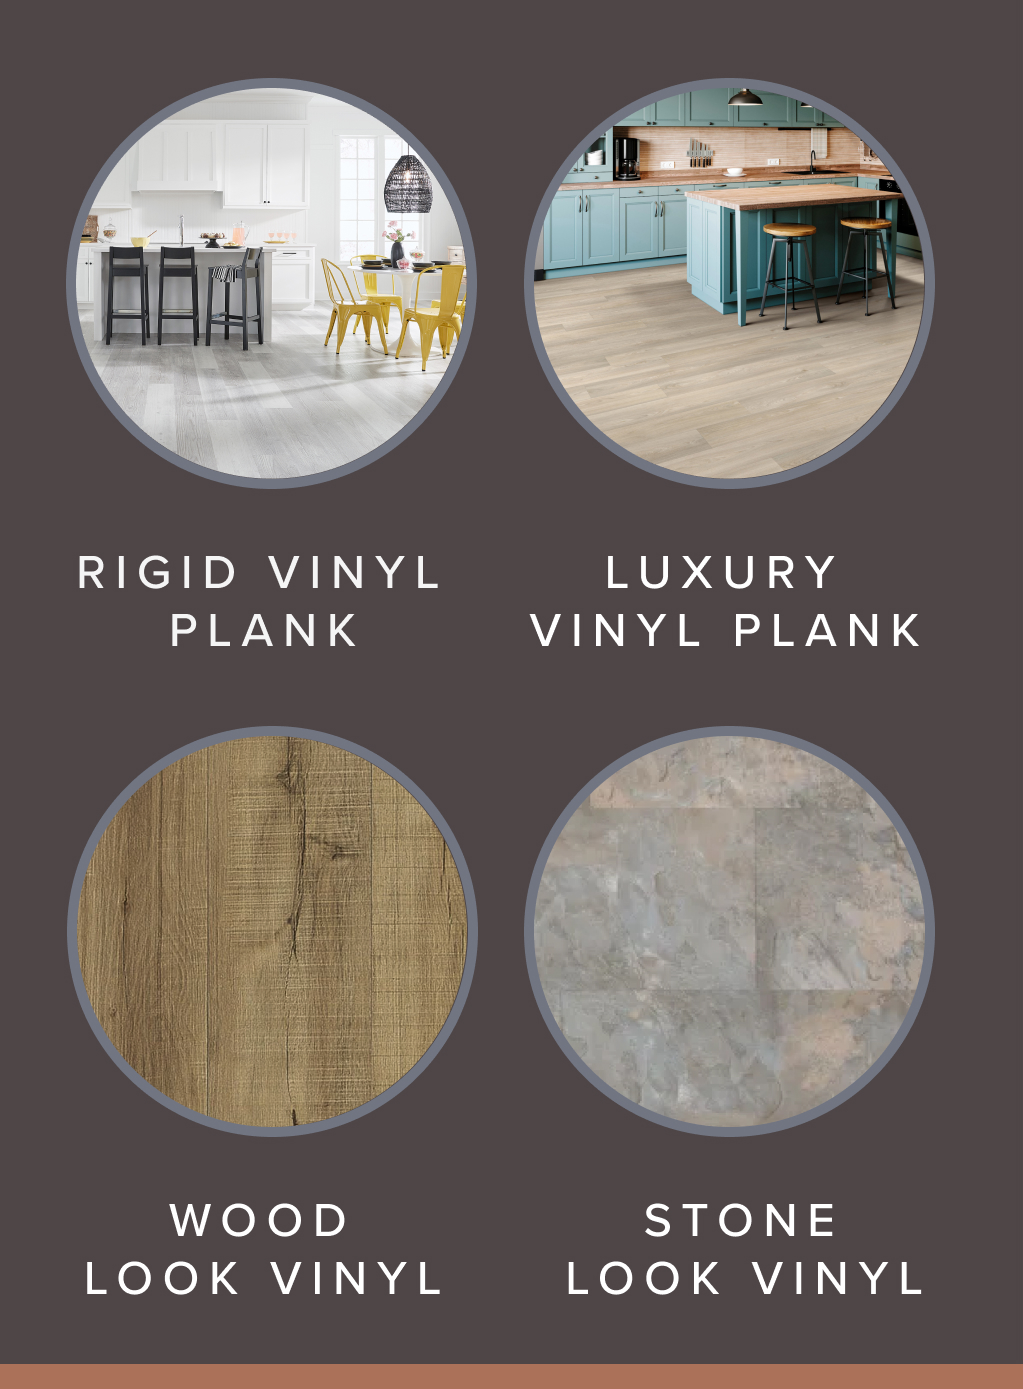 graphic showing wood and stone look vinyl flooring options